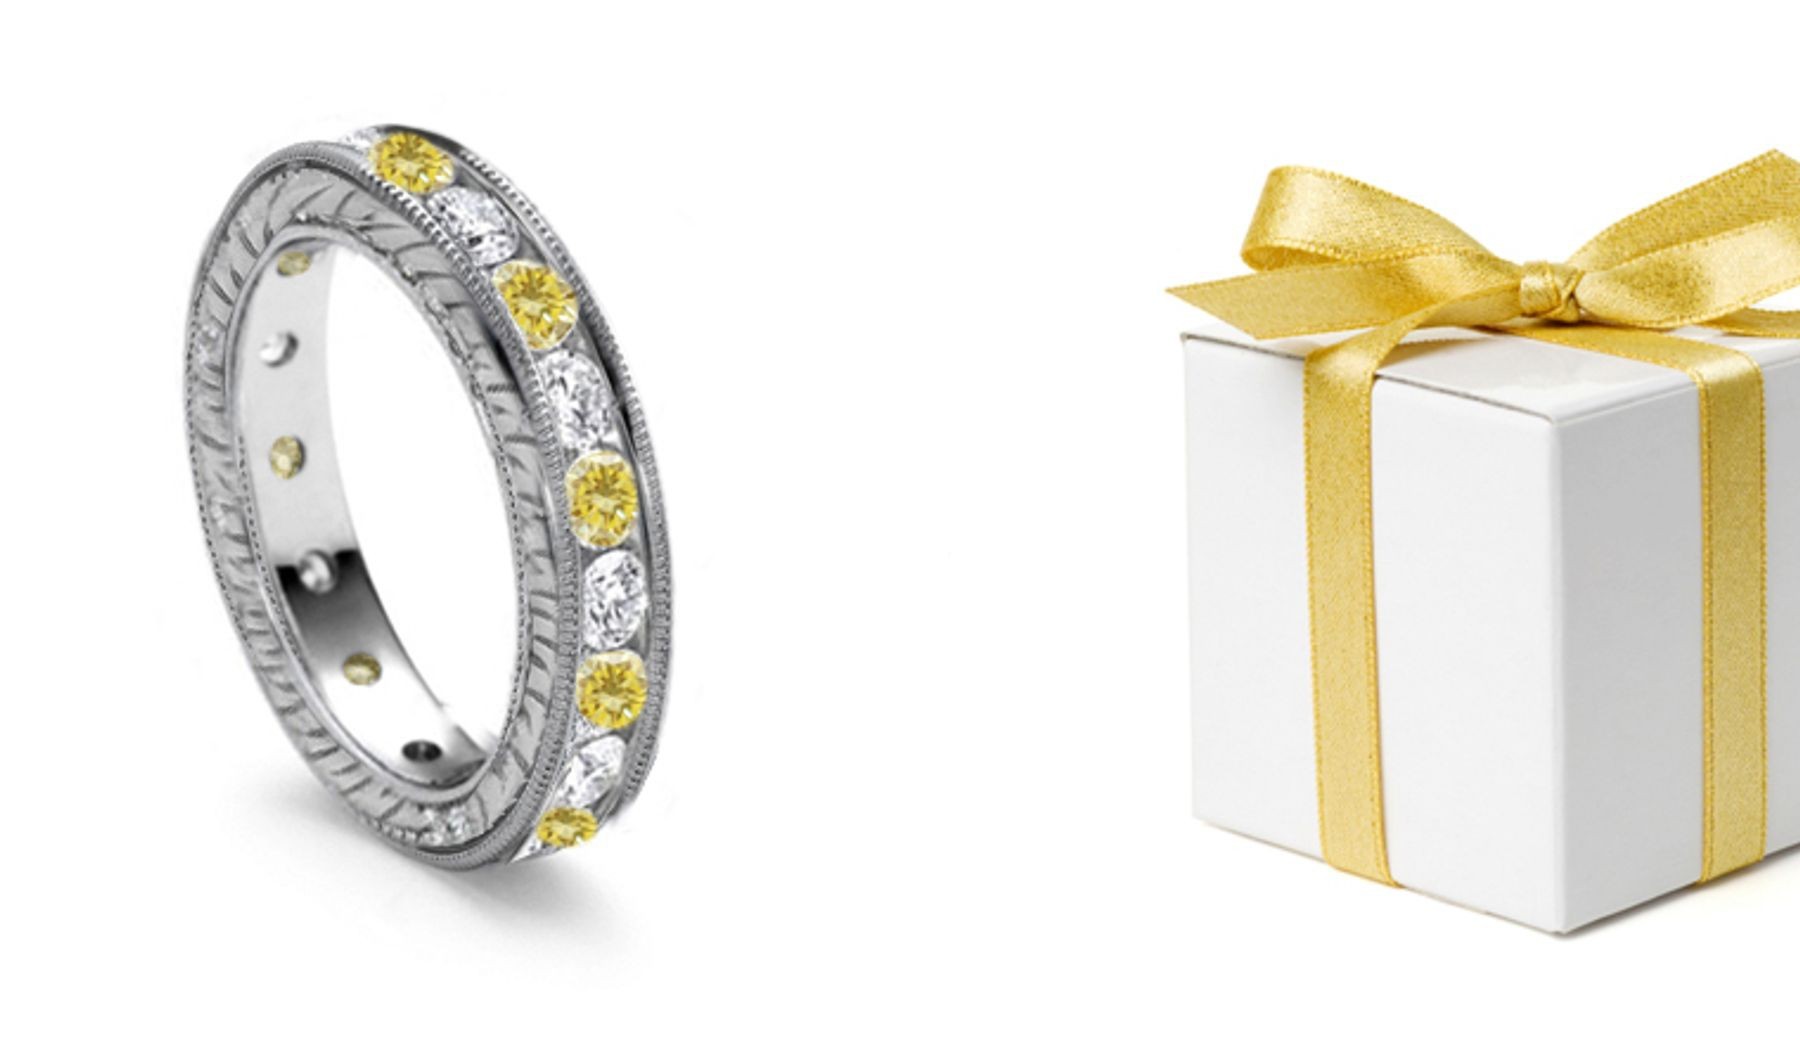 Dazzler: Endless Circle of White & Yellow Diamonds Adorned with Scrolls & Motifs on Band Sides